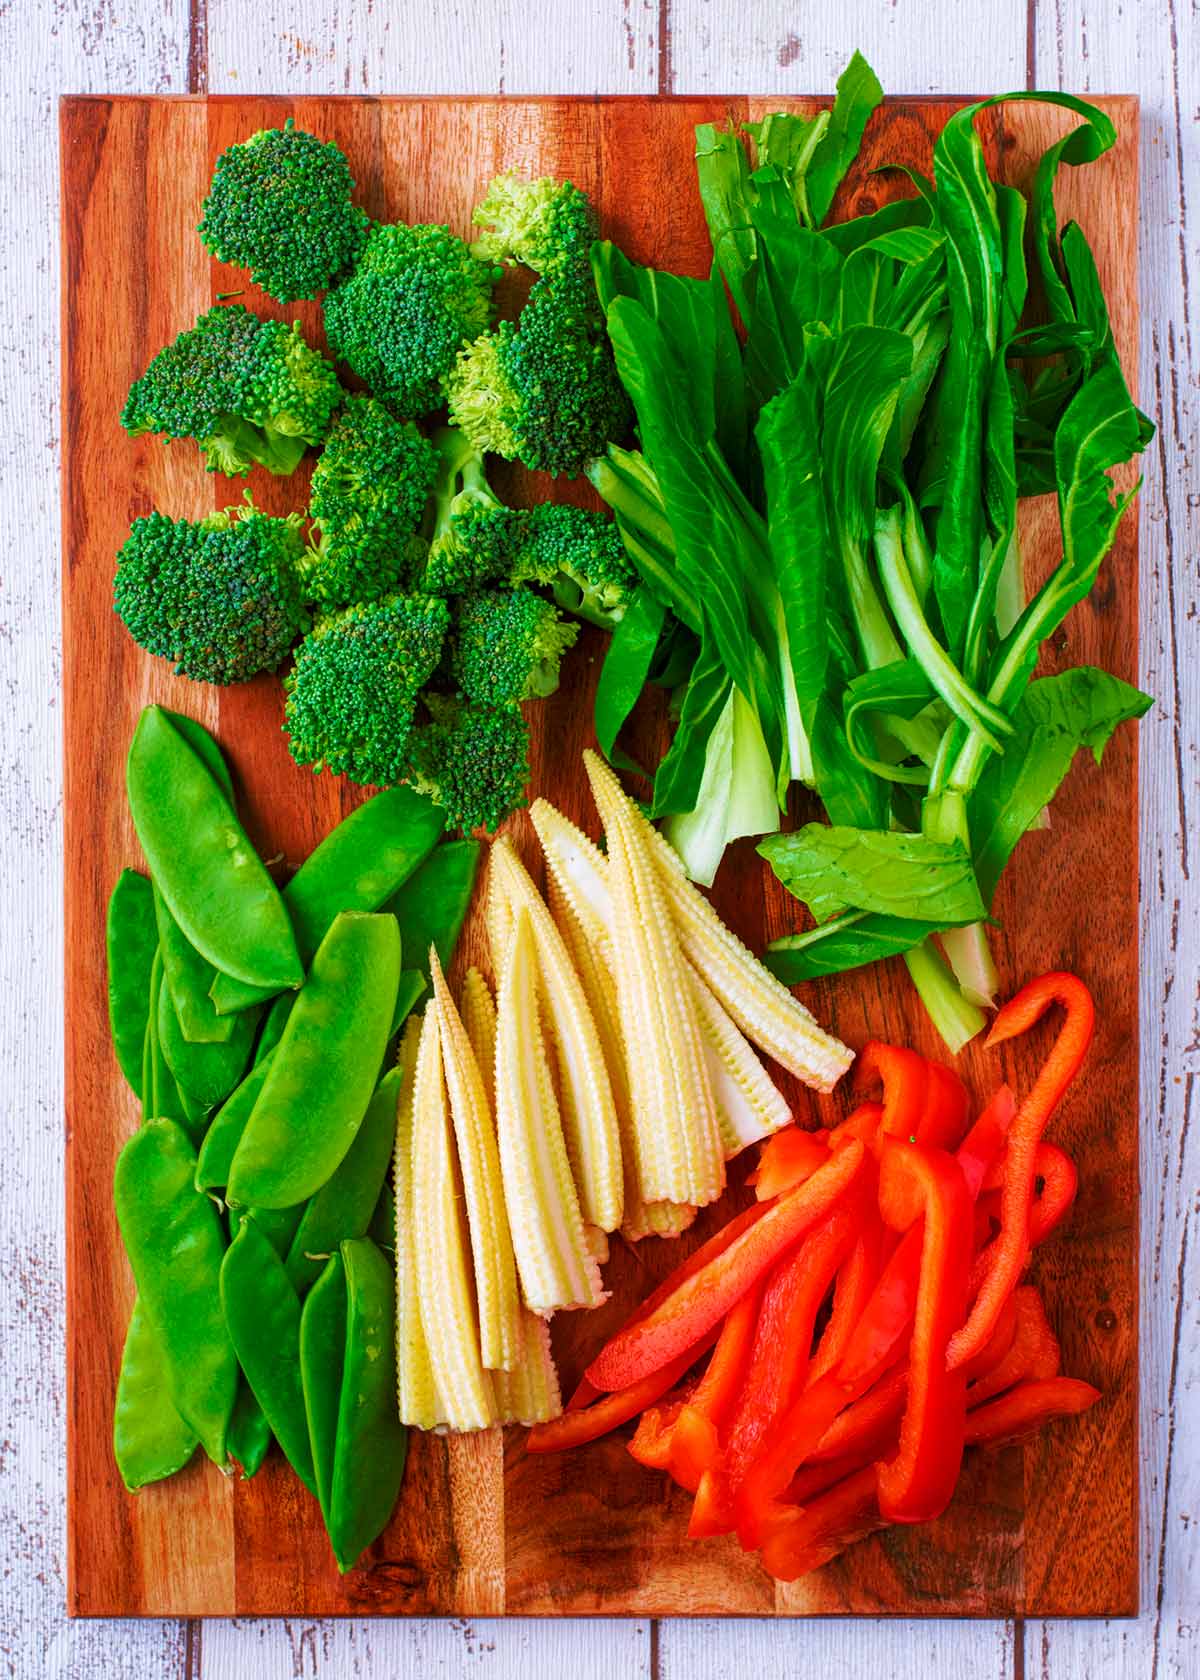 A chopping board with broccoli, pak choi, red pepper, baby corn and mangetout.